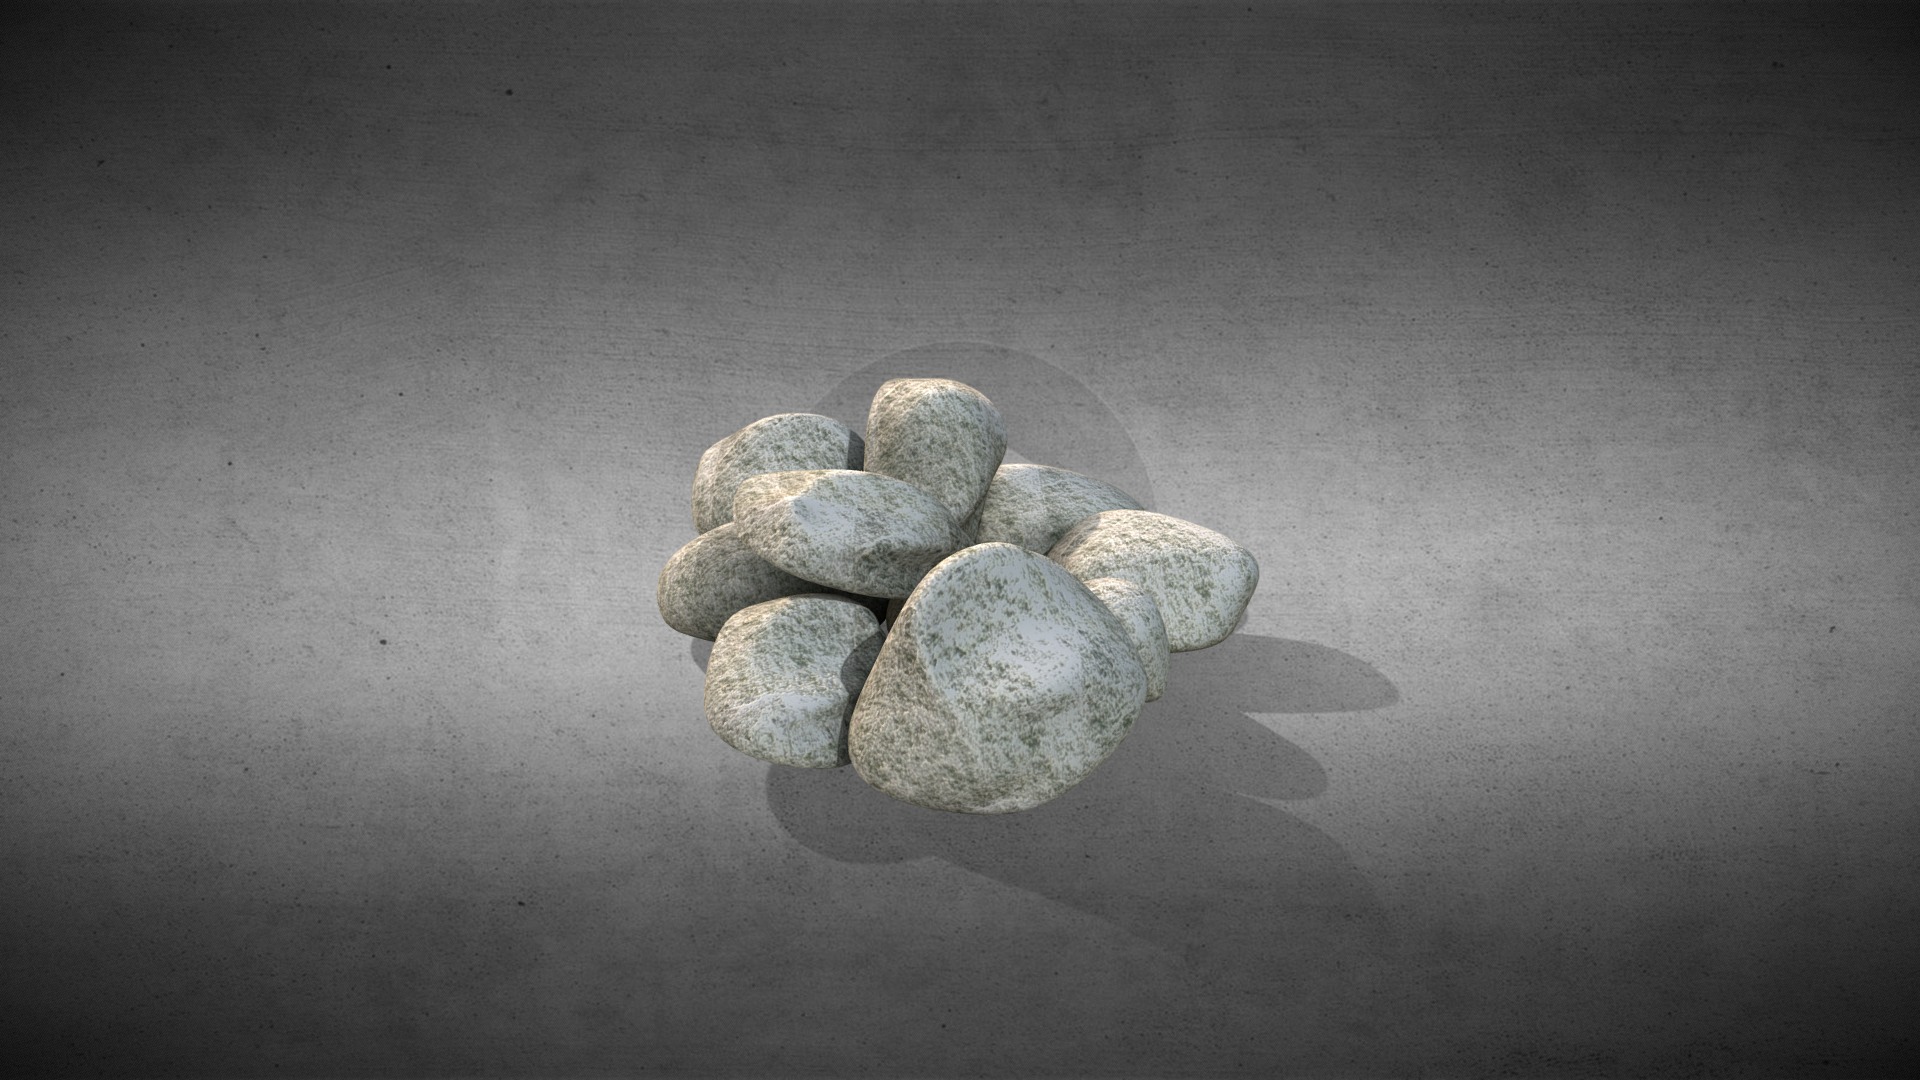 3D model Low-Poly Stones - This is a 3D model of the Low-Poly Stones. The 3D model is about a group of rocks on a table.